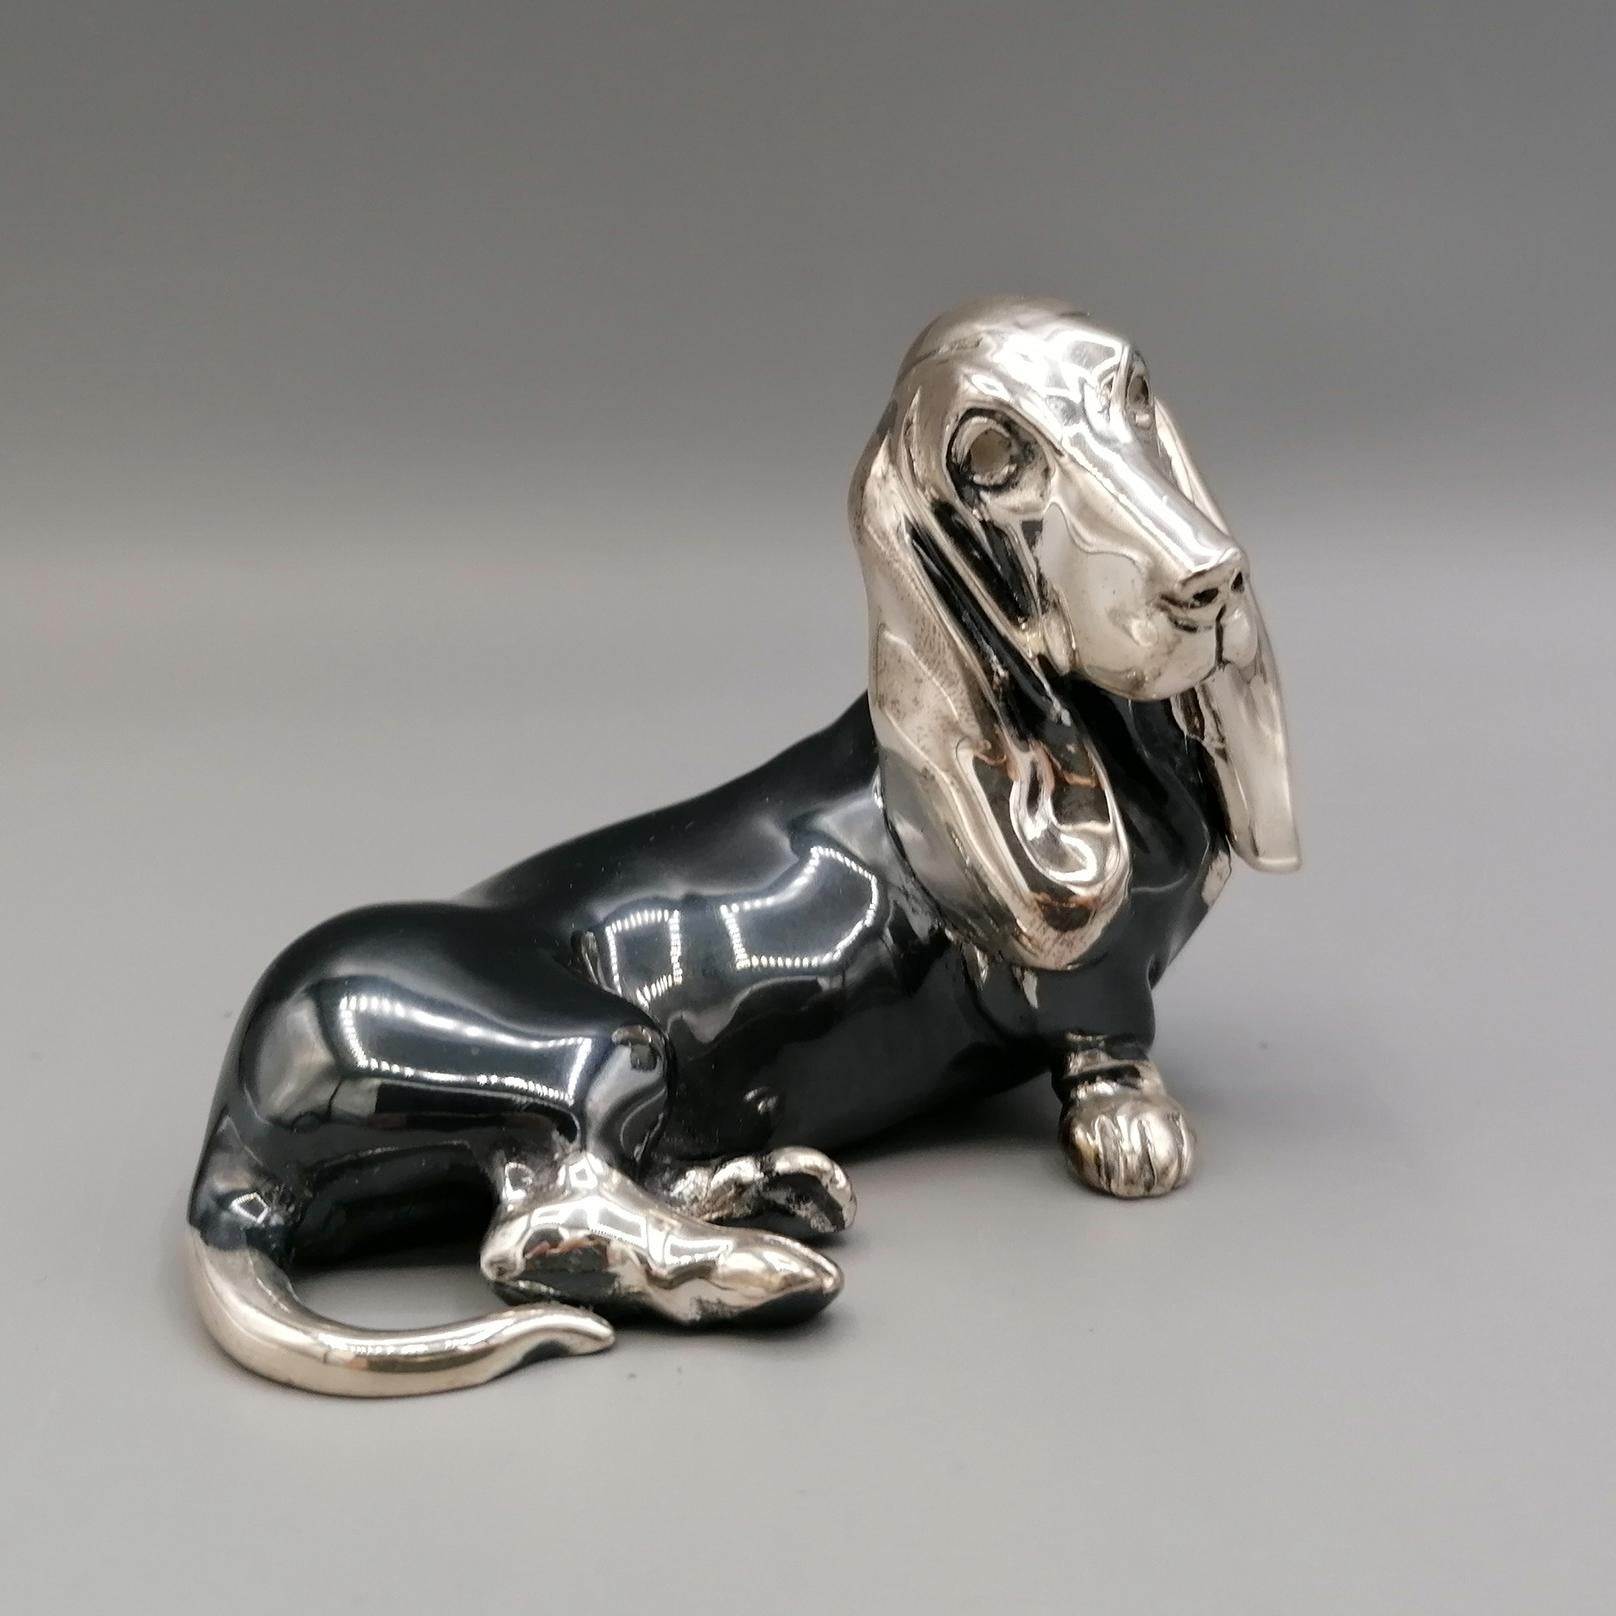 20th Century Solid Silver Sculture Depicting a Basset Hound Dog For Sale 1